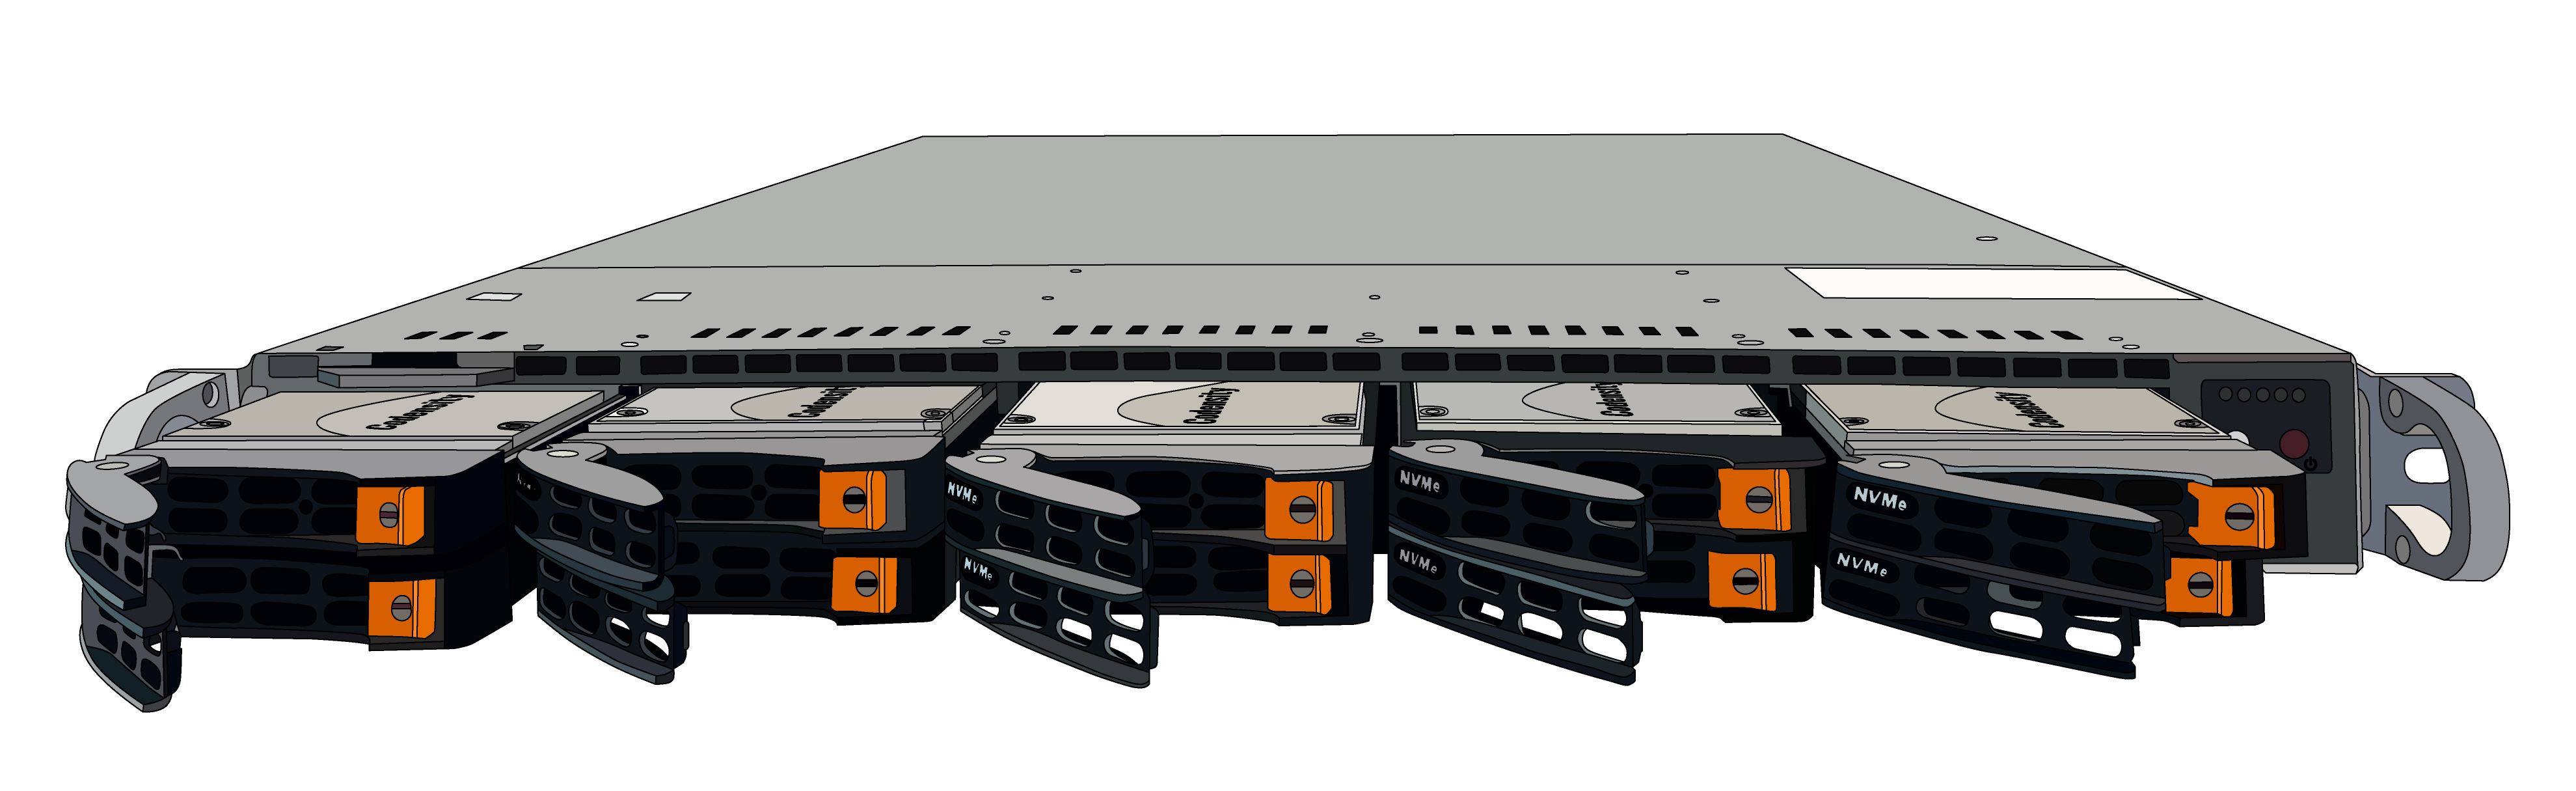 NETINT Video Transcoding Server with 10 T408 Video processing Units